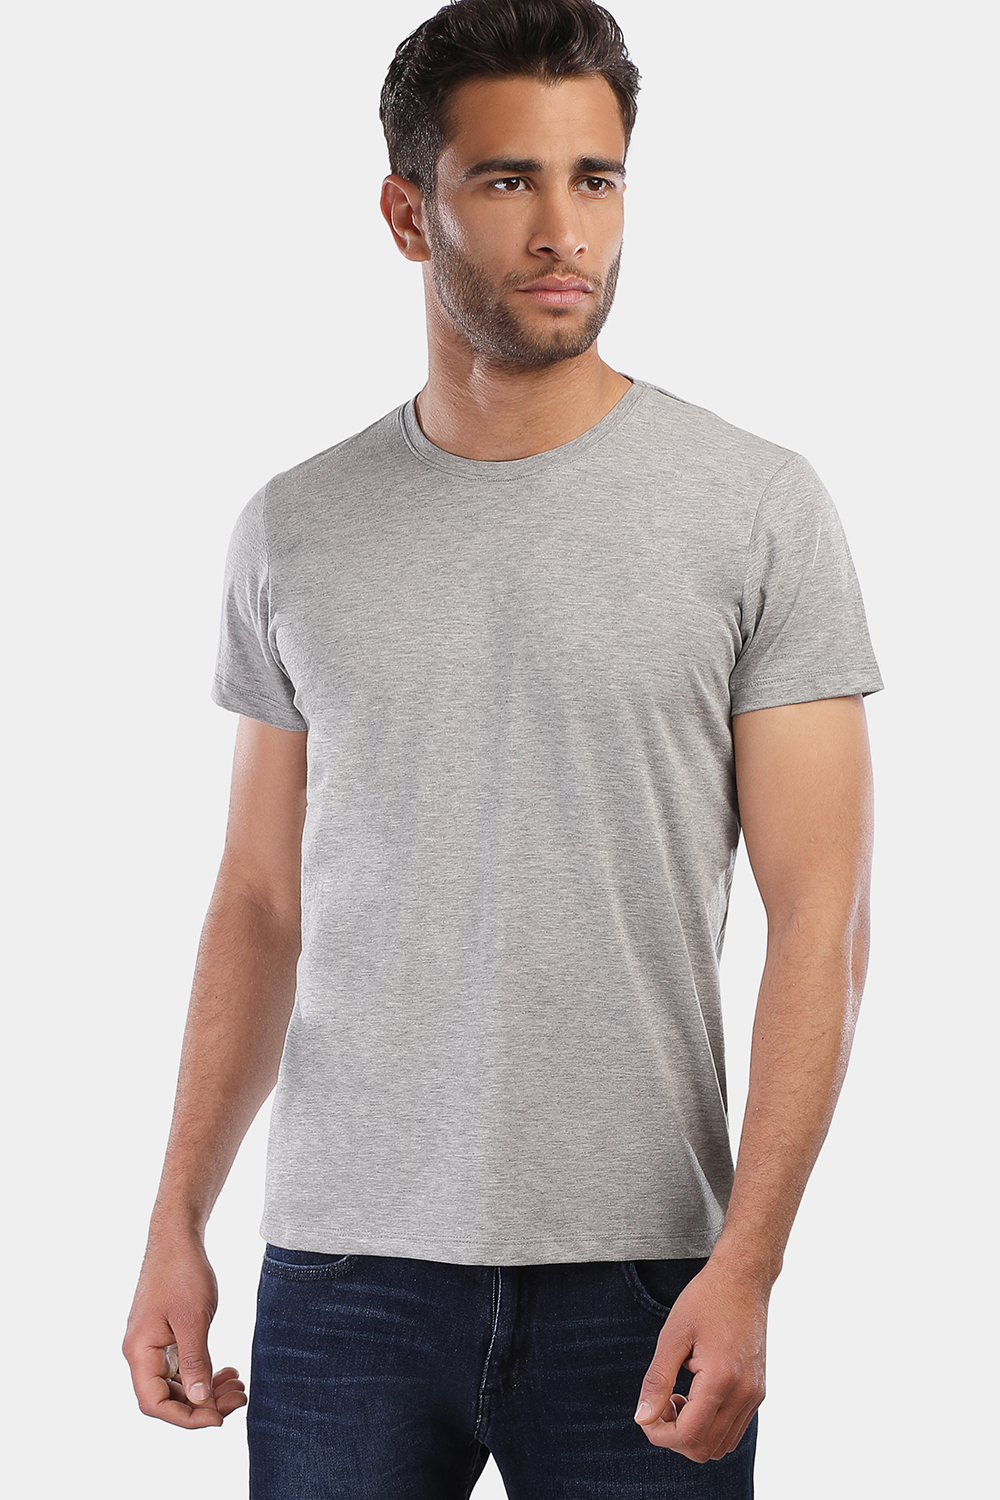 New Fit Plain Round T-Shirt Light Gray - TIE HOUSE